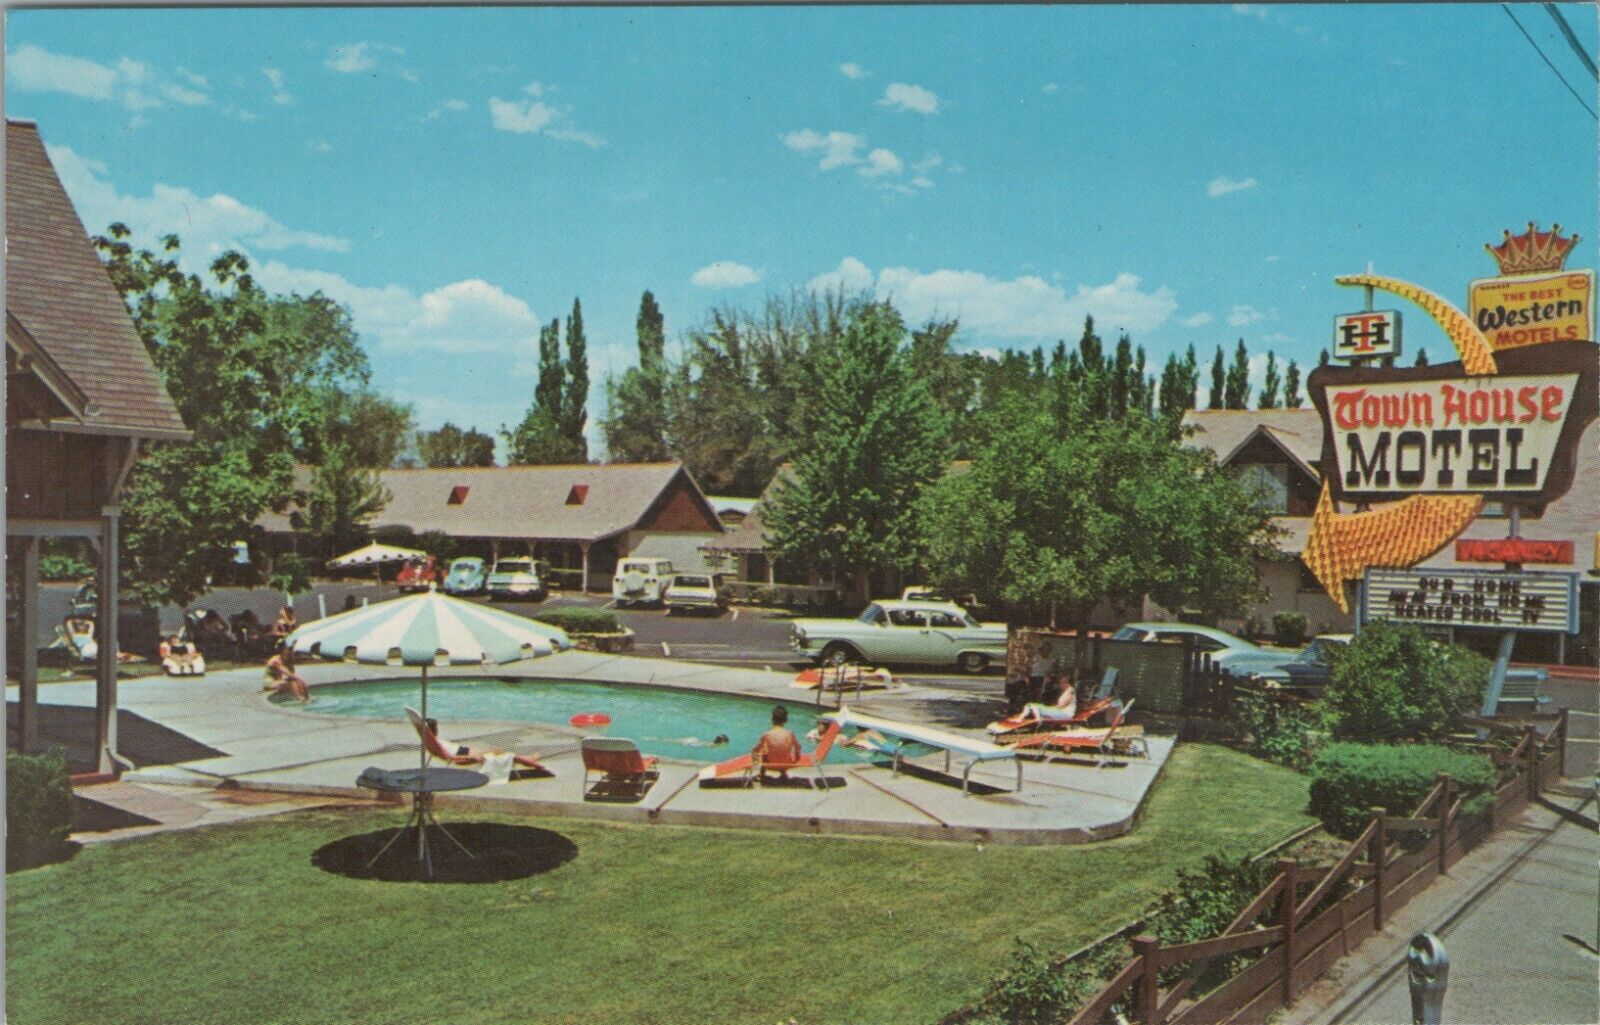 c1960s Town House Motel Bishop California autos pool swimmers postcard A873